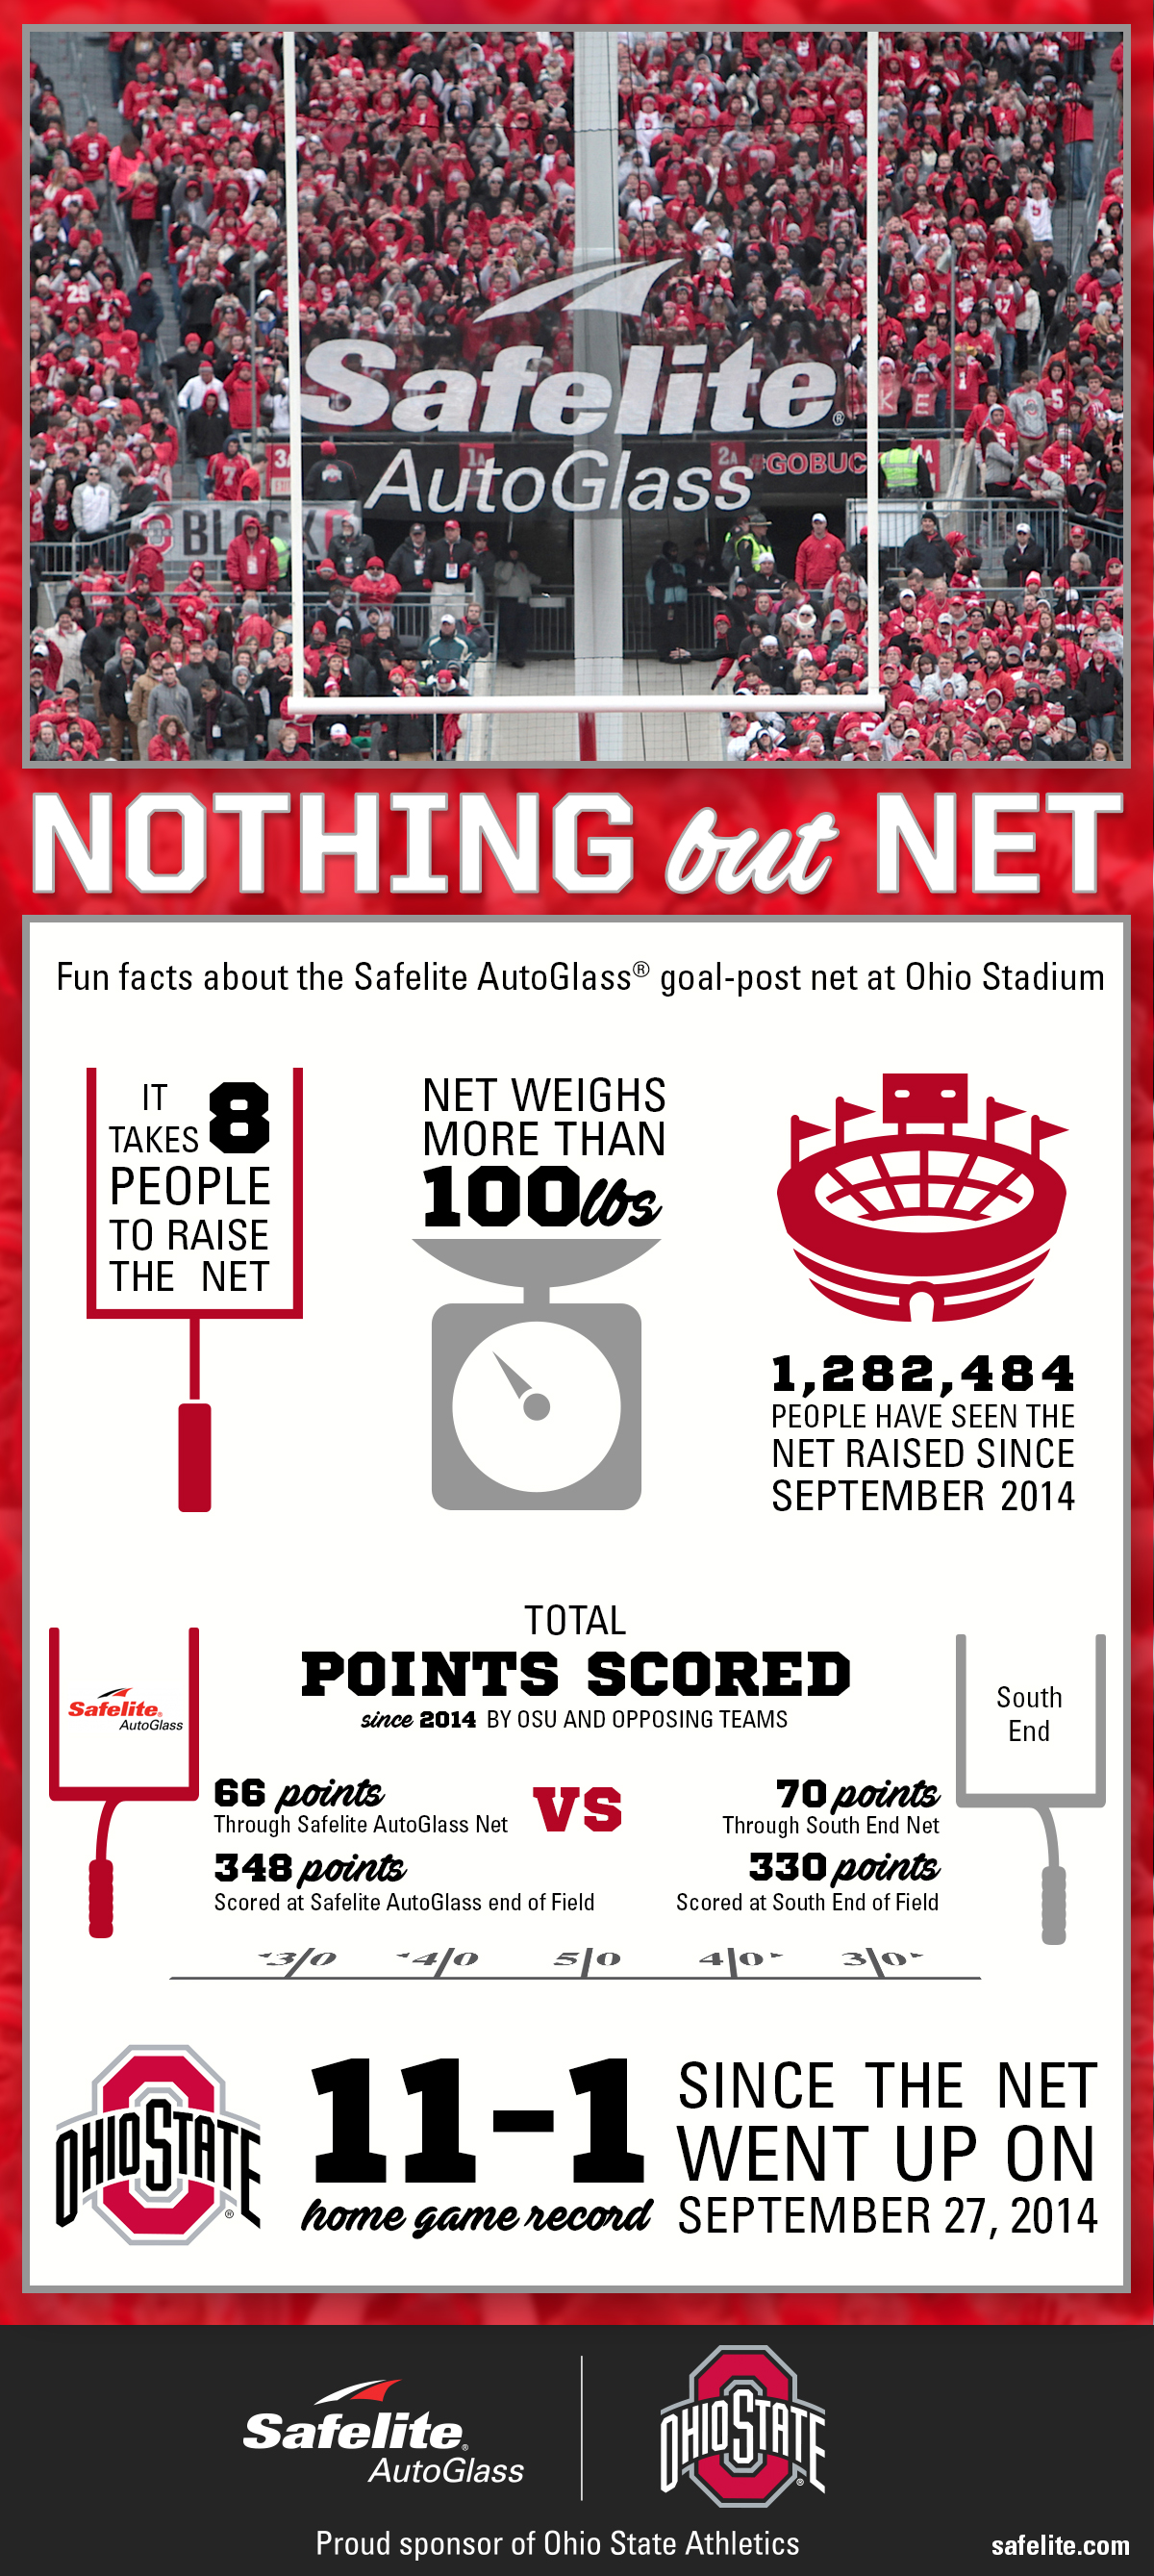 Safelite is a proud sponsor of Ohio State Athletics. Did you know these fun facts about their field goal net at Ohio Stadium?